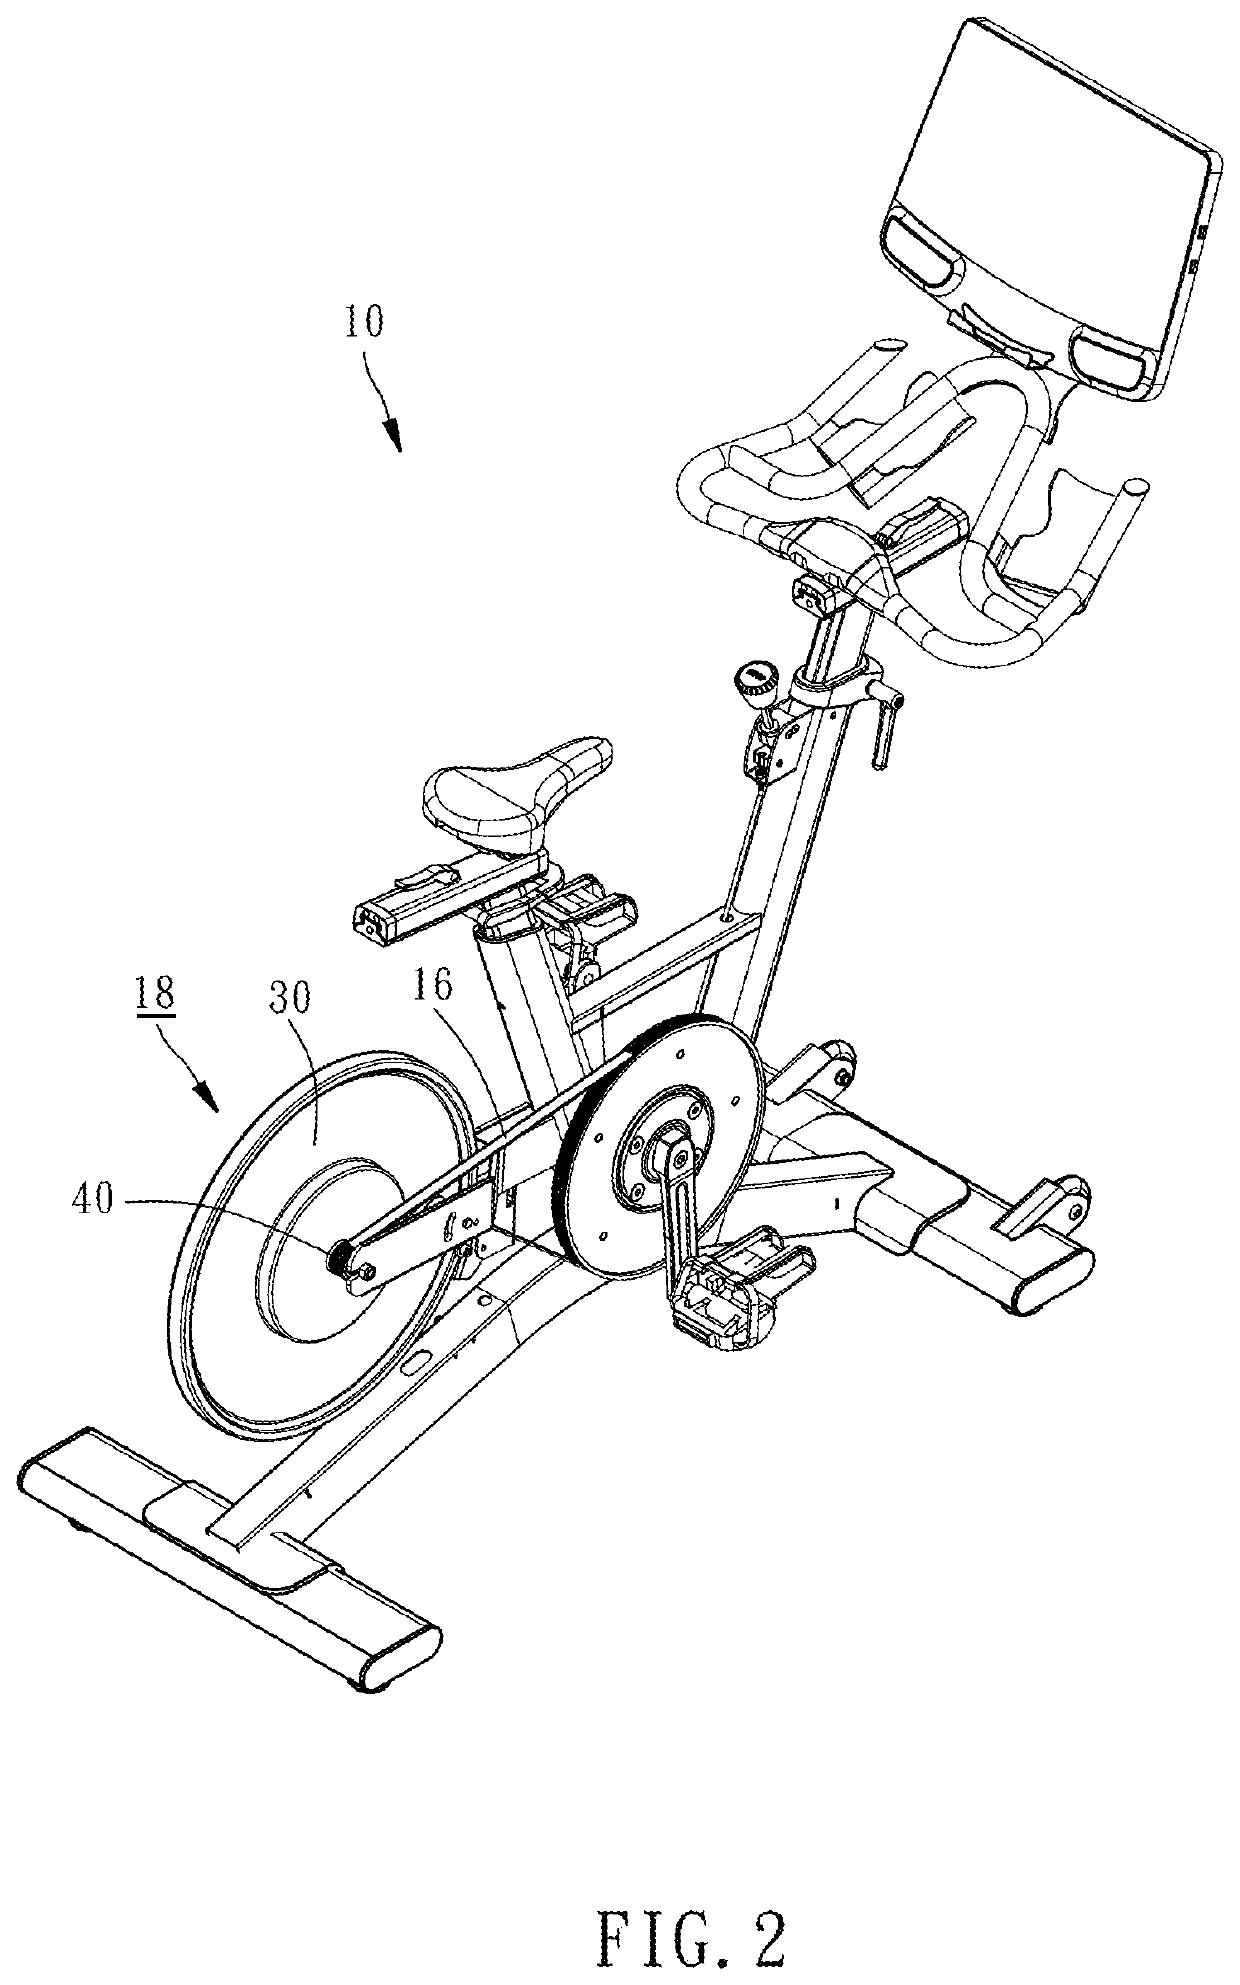 Internal magnetic resistance system for use with fitness device